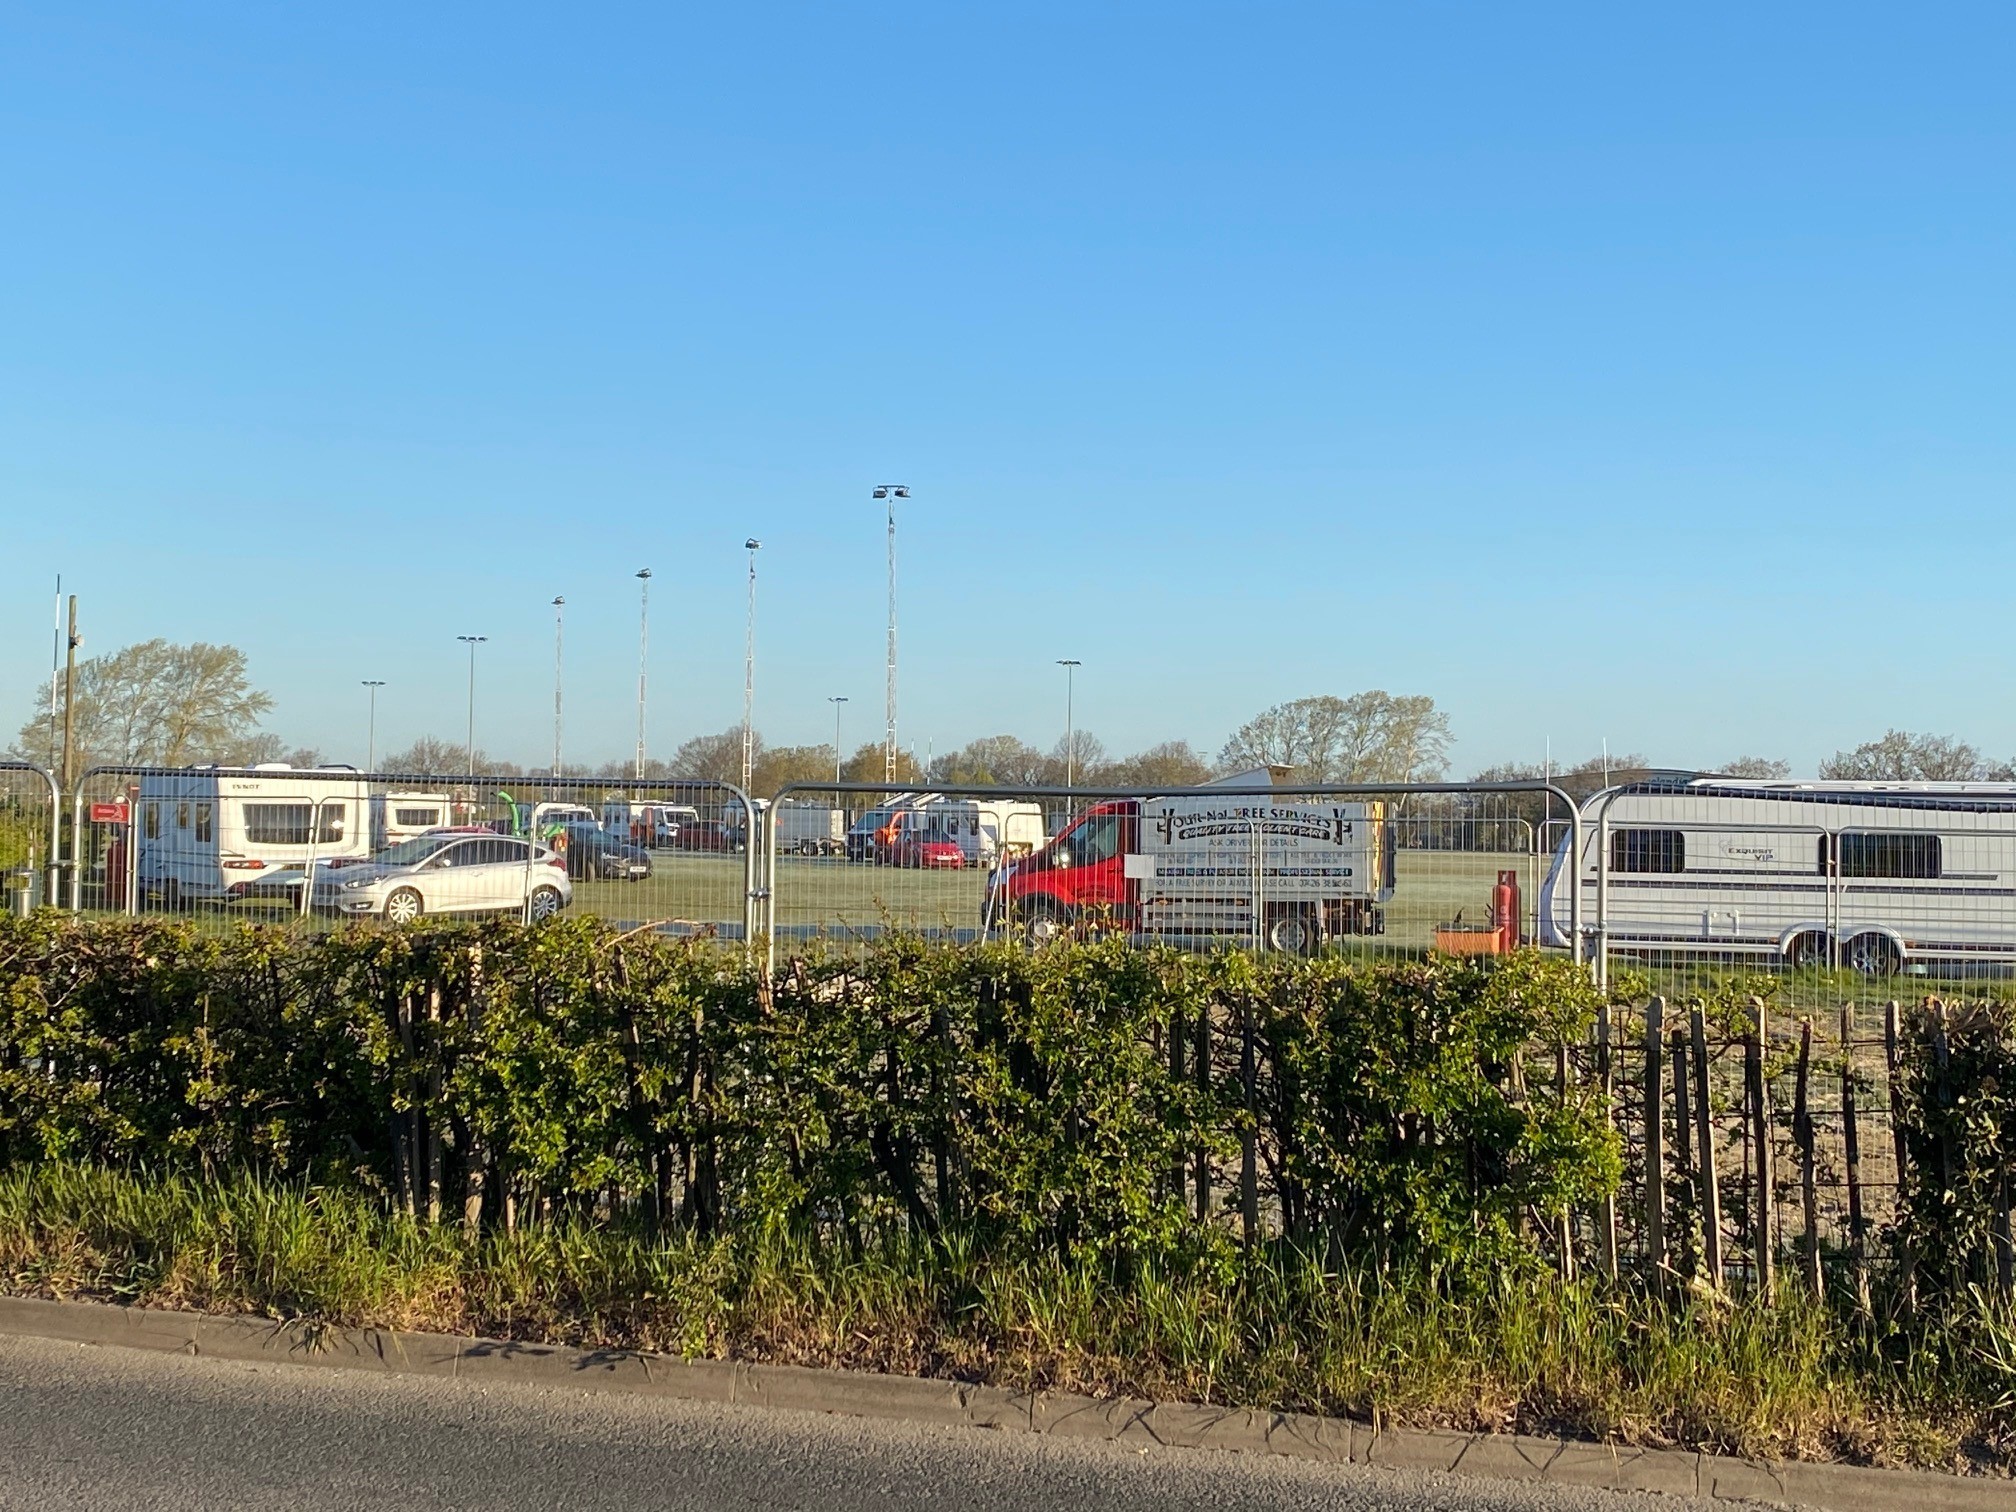 Travellers at Colchester Rugby Club